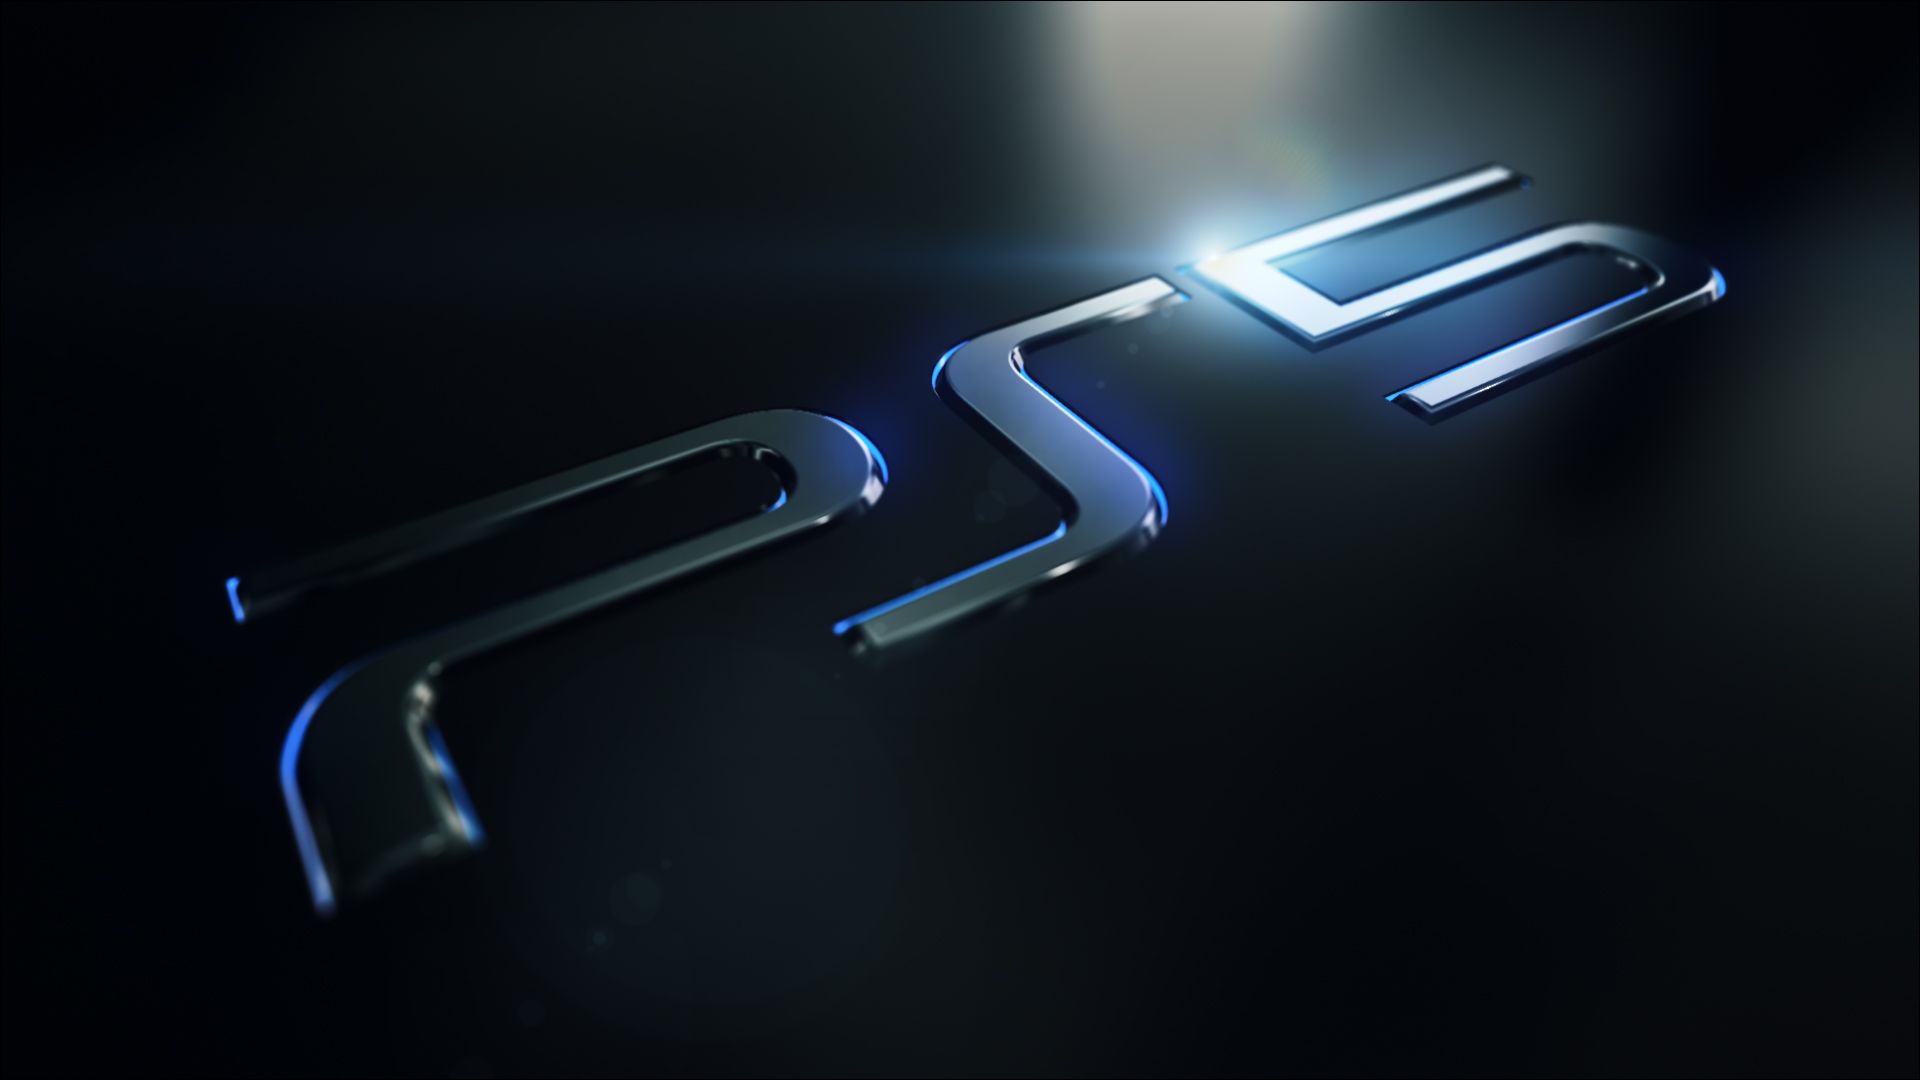 PS5 release date, design, price, and launch titles for Sony's next